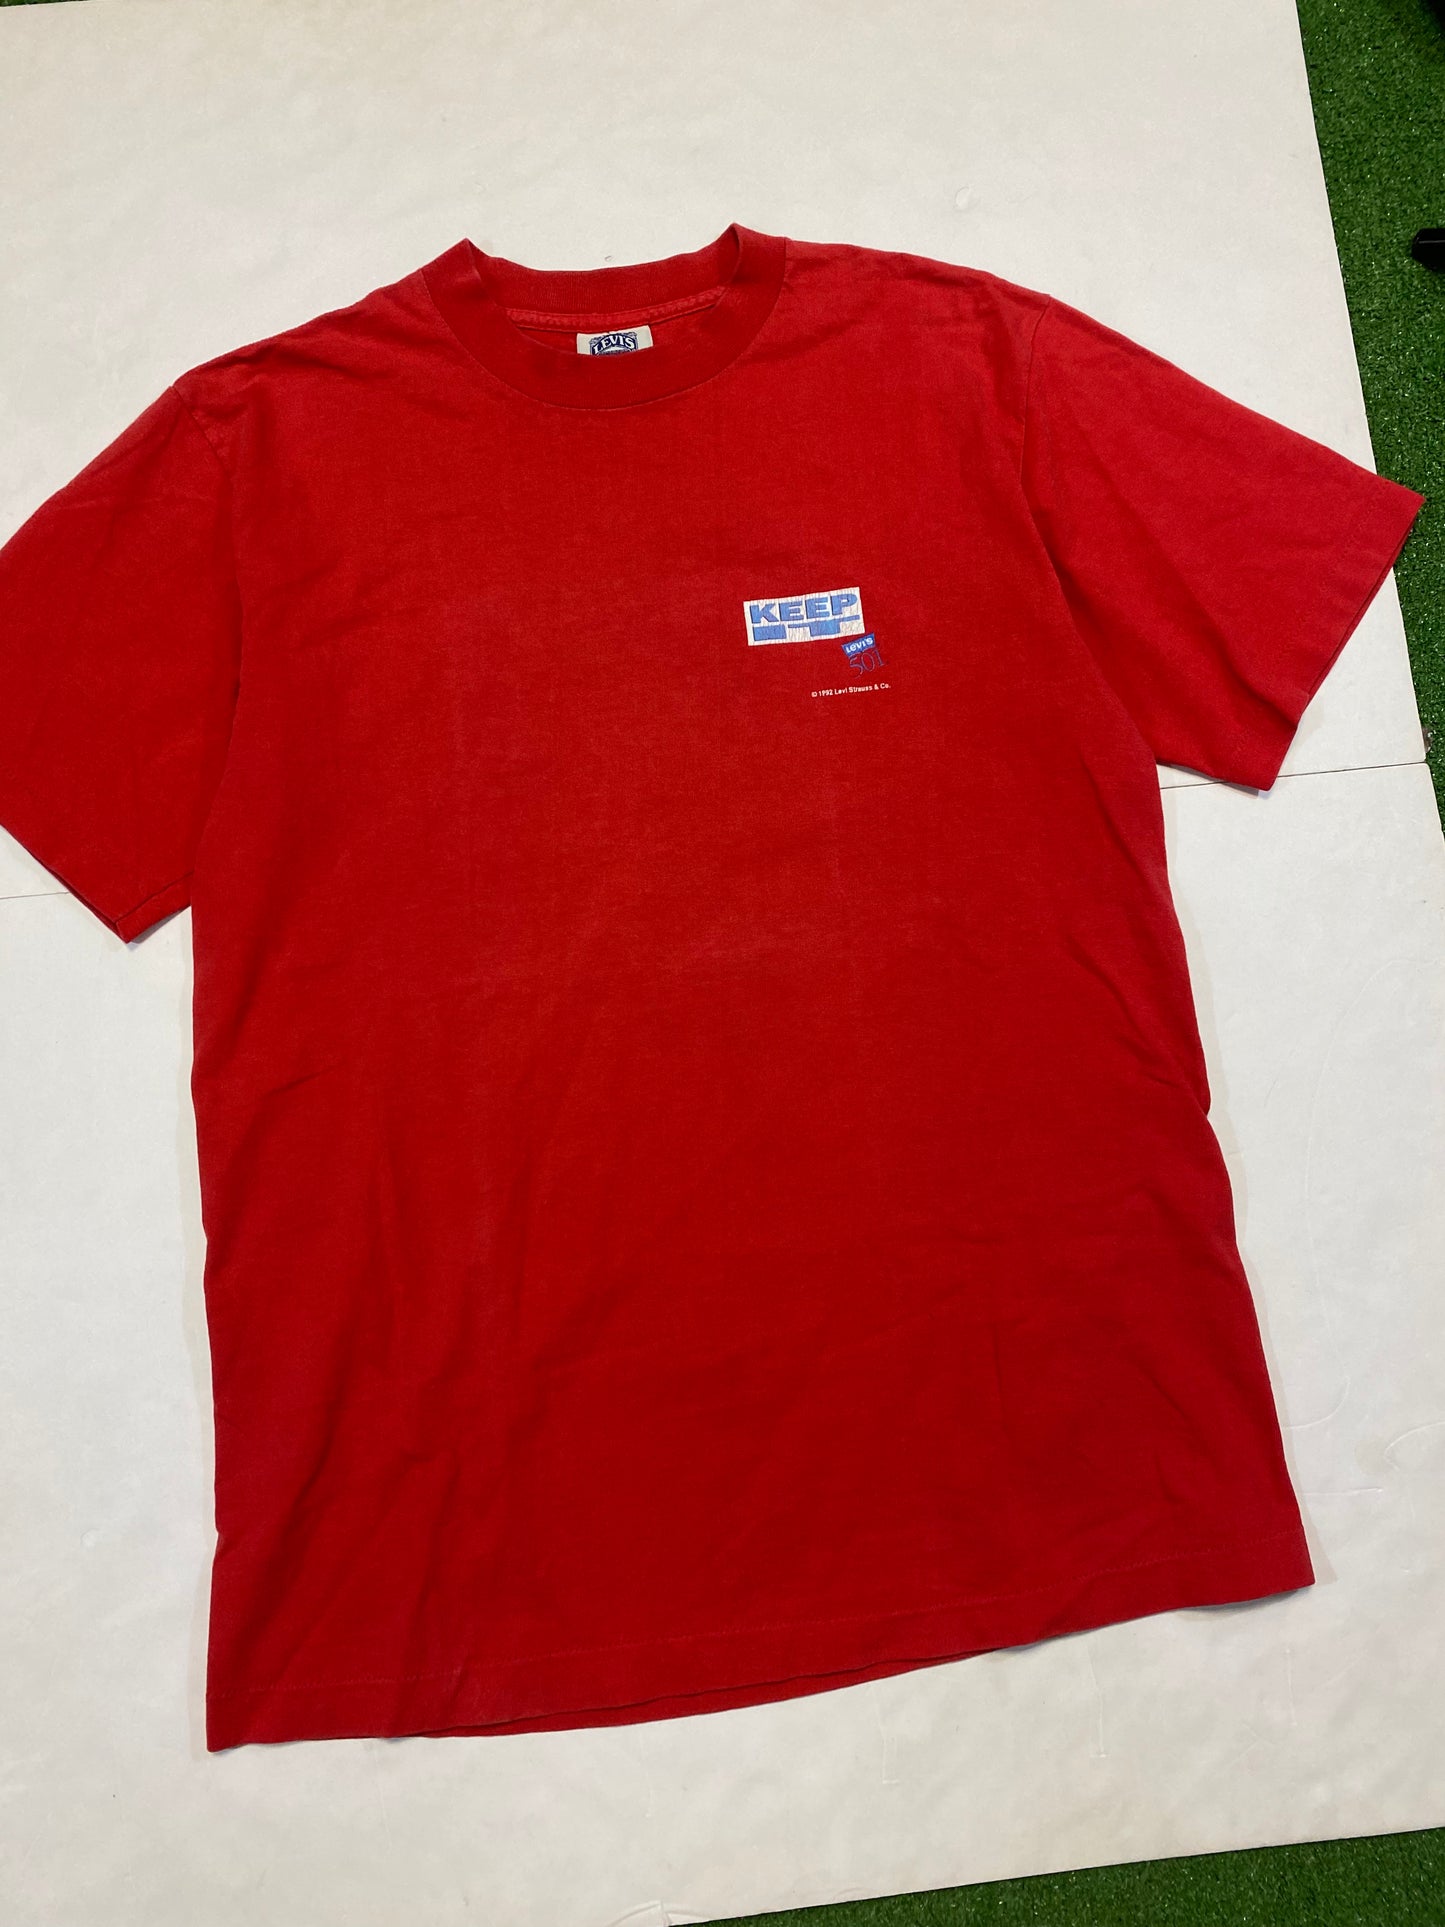 1992 Levi’s 501 “Keep it buttoned” T-Shirt